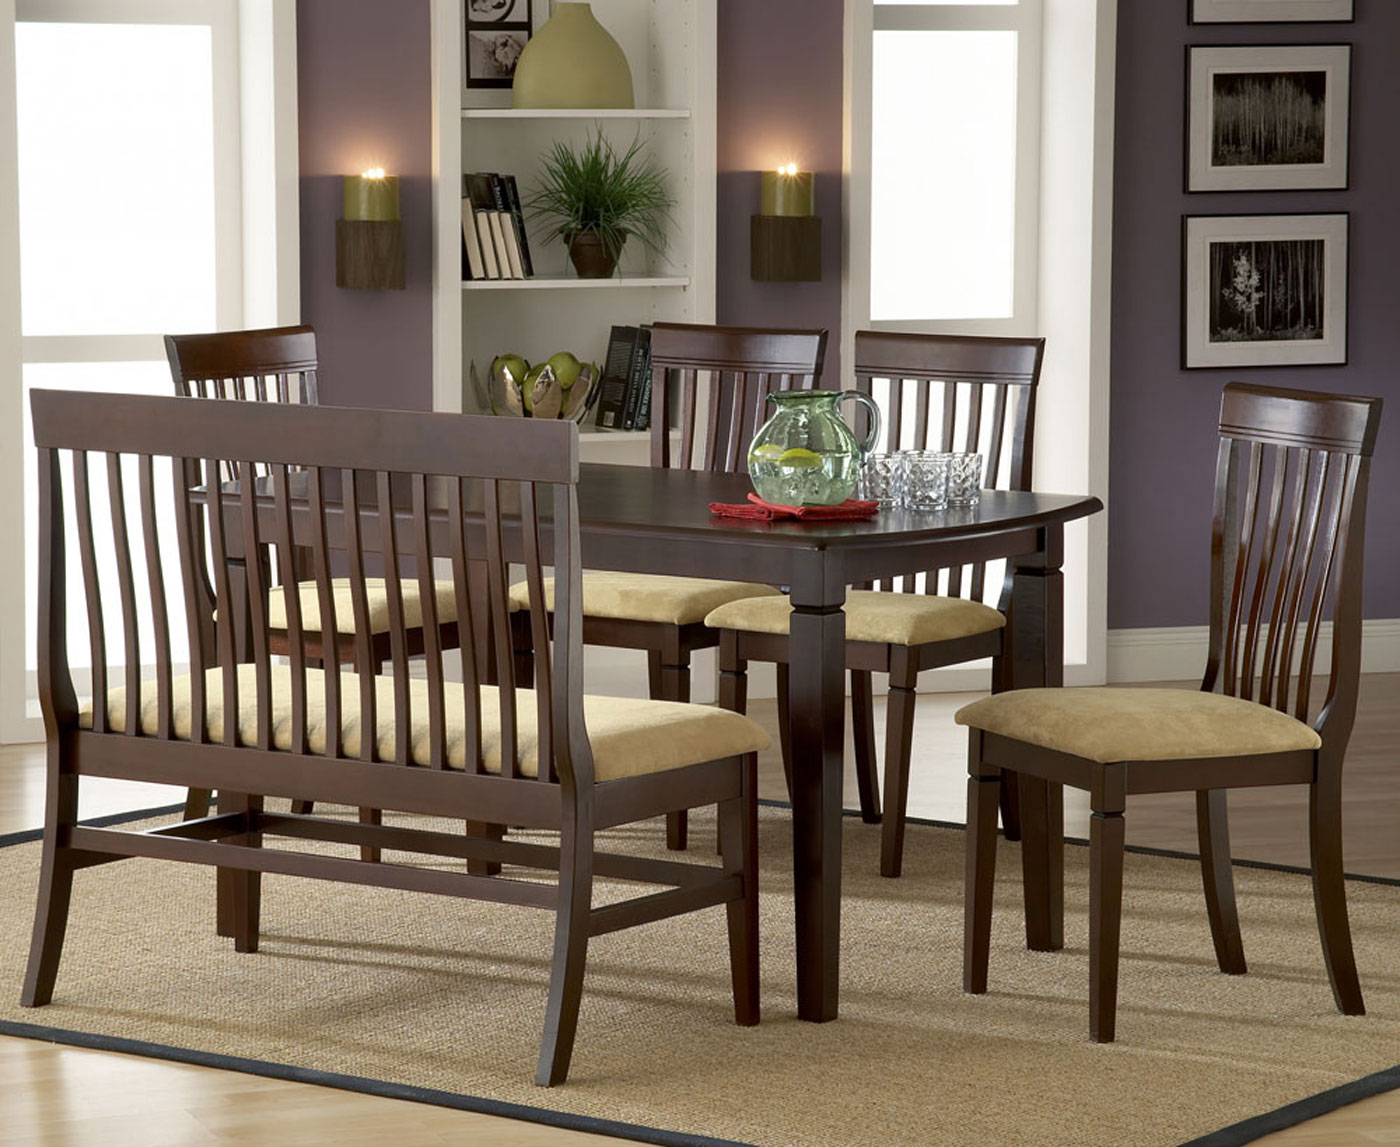 Dining Room Bench Fetching Dining Room Furniture With Bench Seating Design Ideas With Classy Rectangular Wooden Dining Table Set Ideas And Simple Bench Design Also Rustic Wood Chair Padded Seat Ideas  Dining Room Modern Dining Room Furniture Design